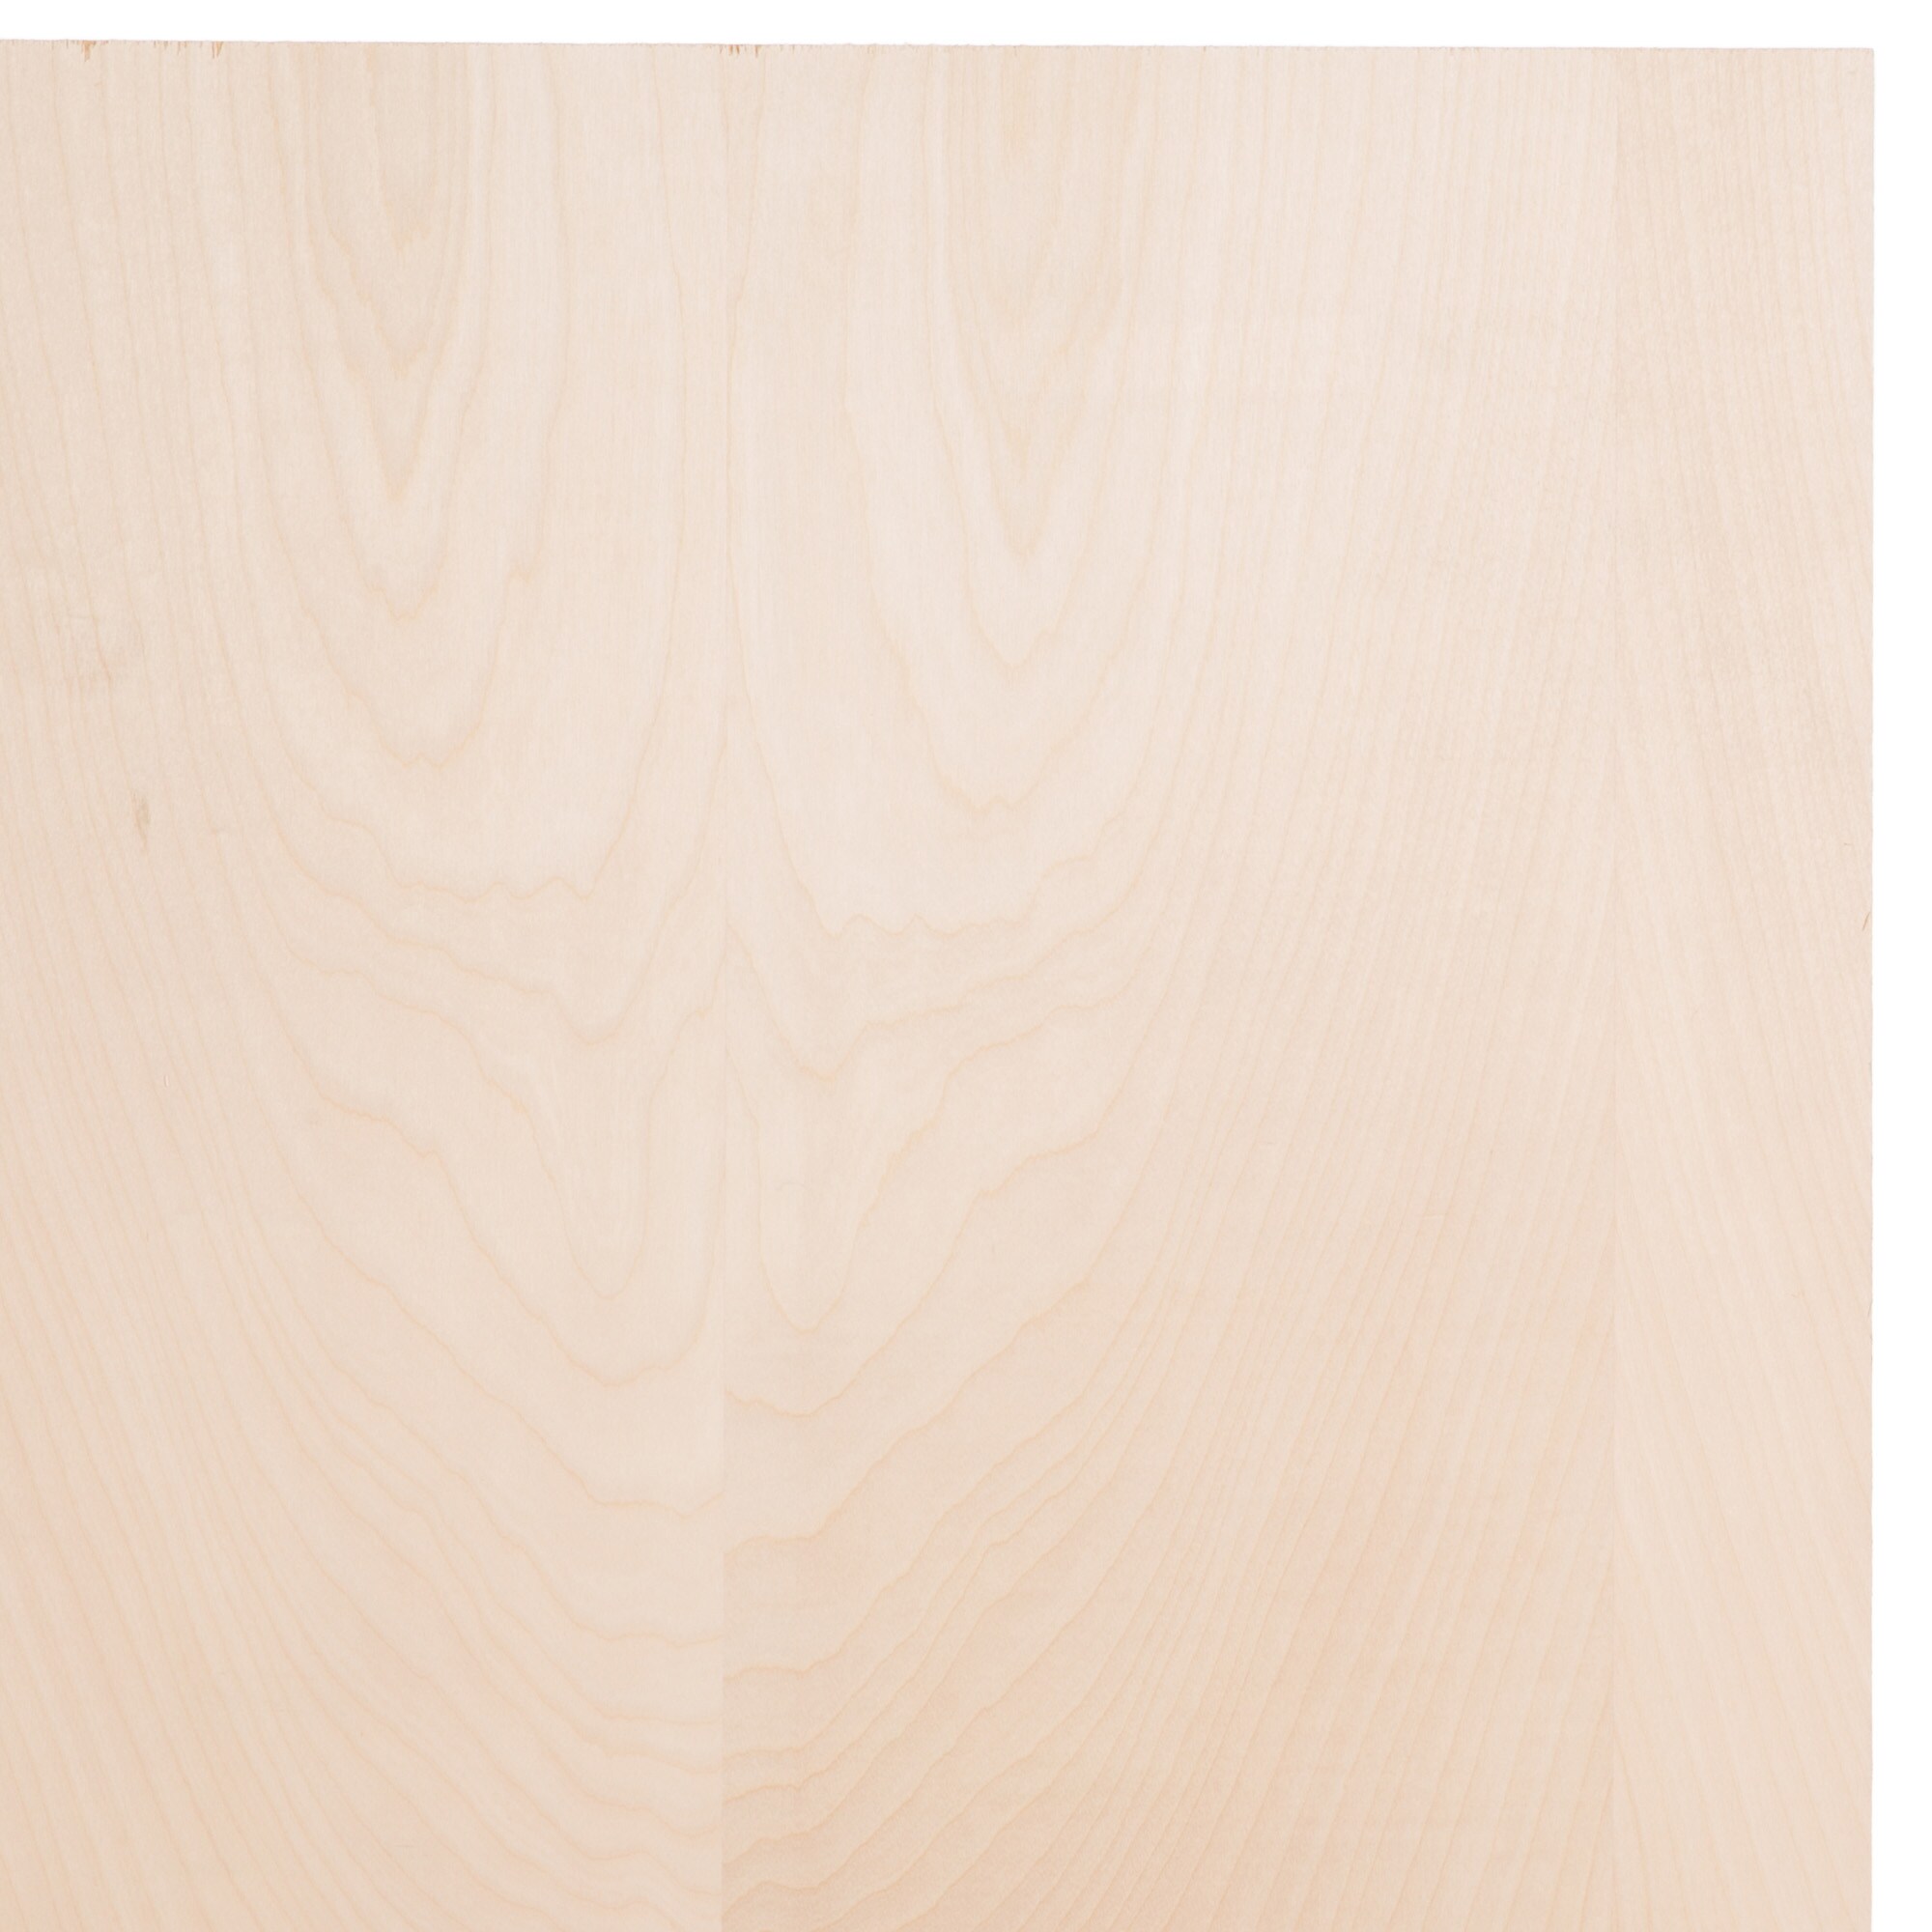 AUPROTEC 5X A3 Plywood Sheets 3mm Birch 297 mm x 420 mm First Class Birchwood Solid Ply Wood Hardwood Panels for Arts and Crafts Fretsaw Woodworking jigs Painting Drawing Board